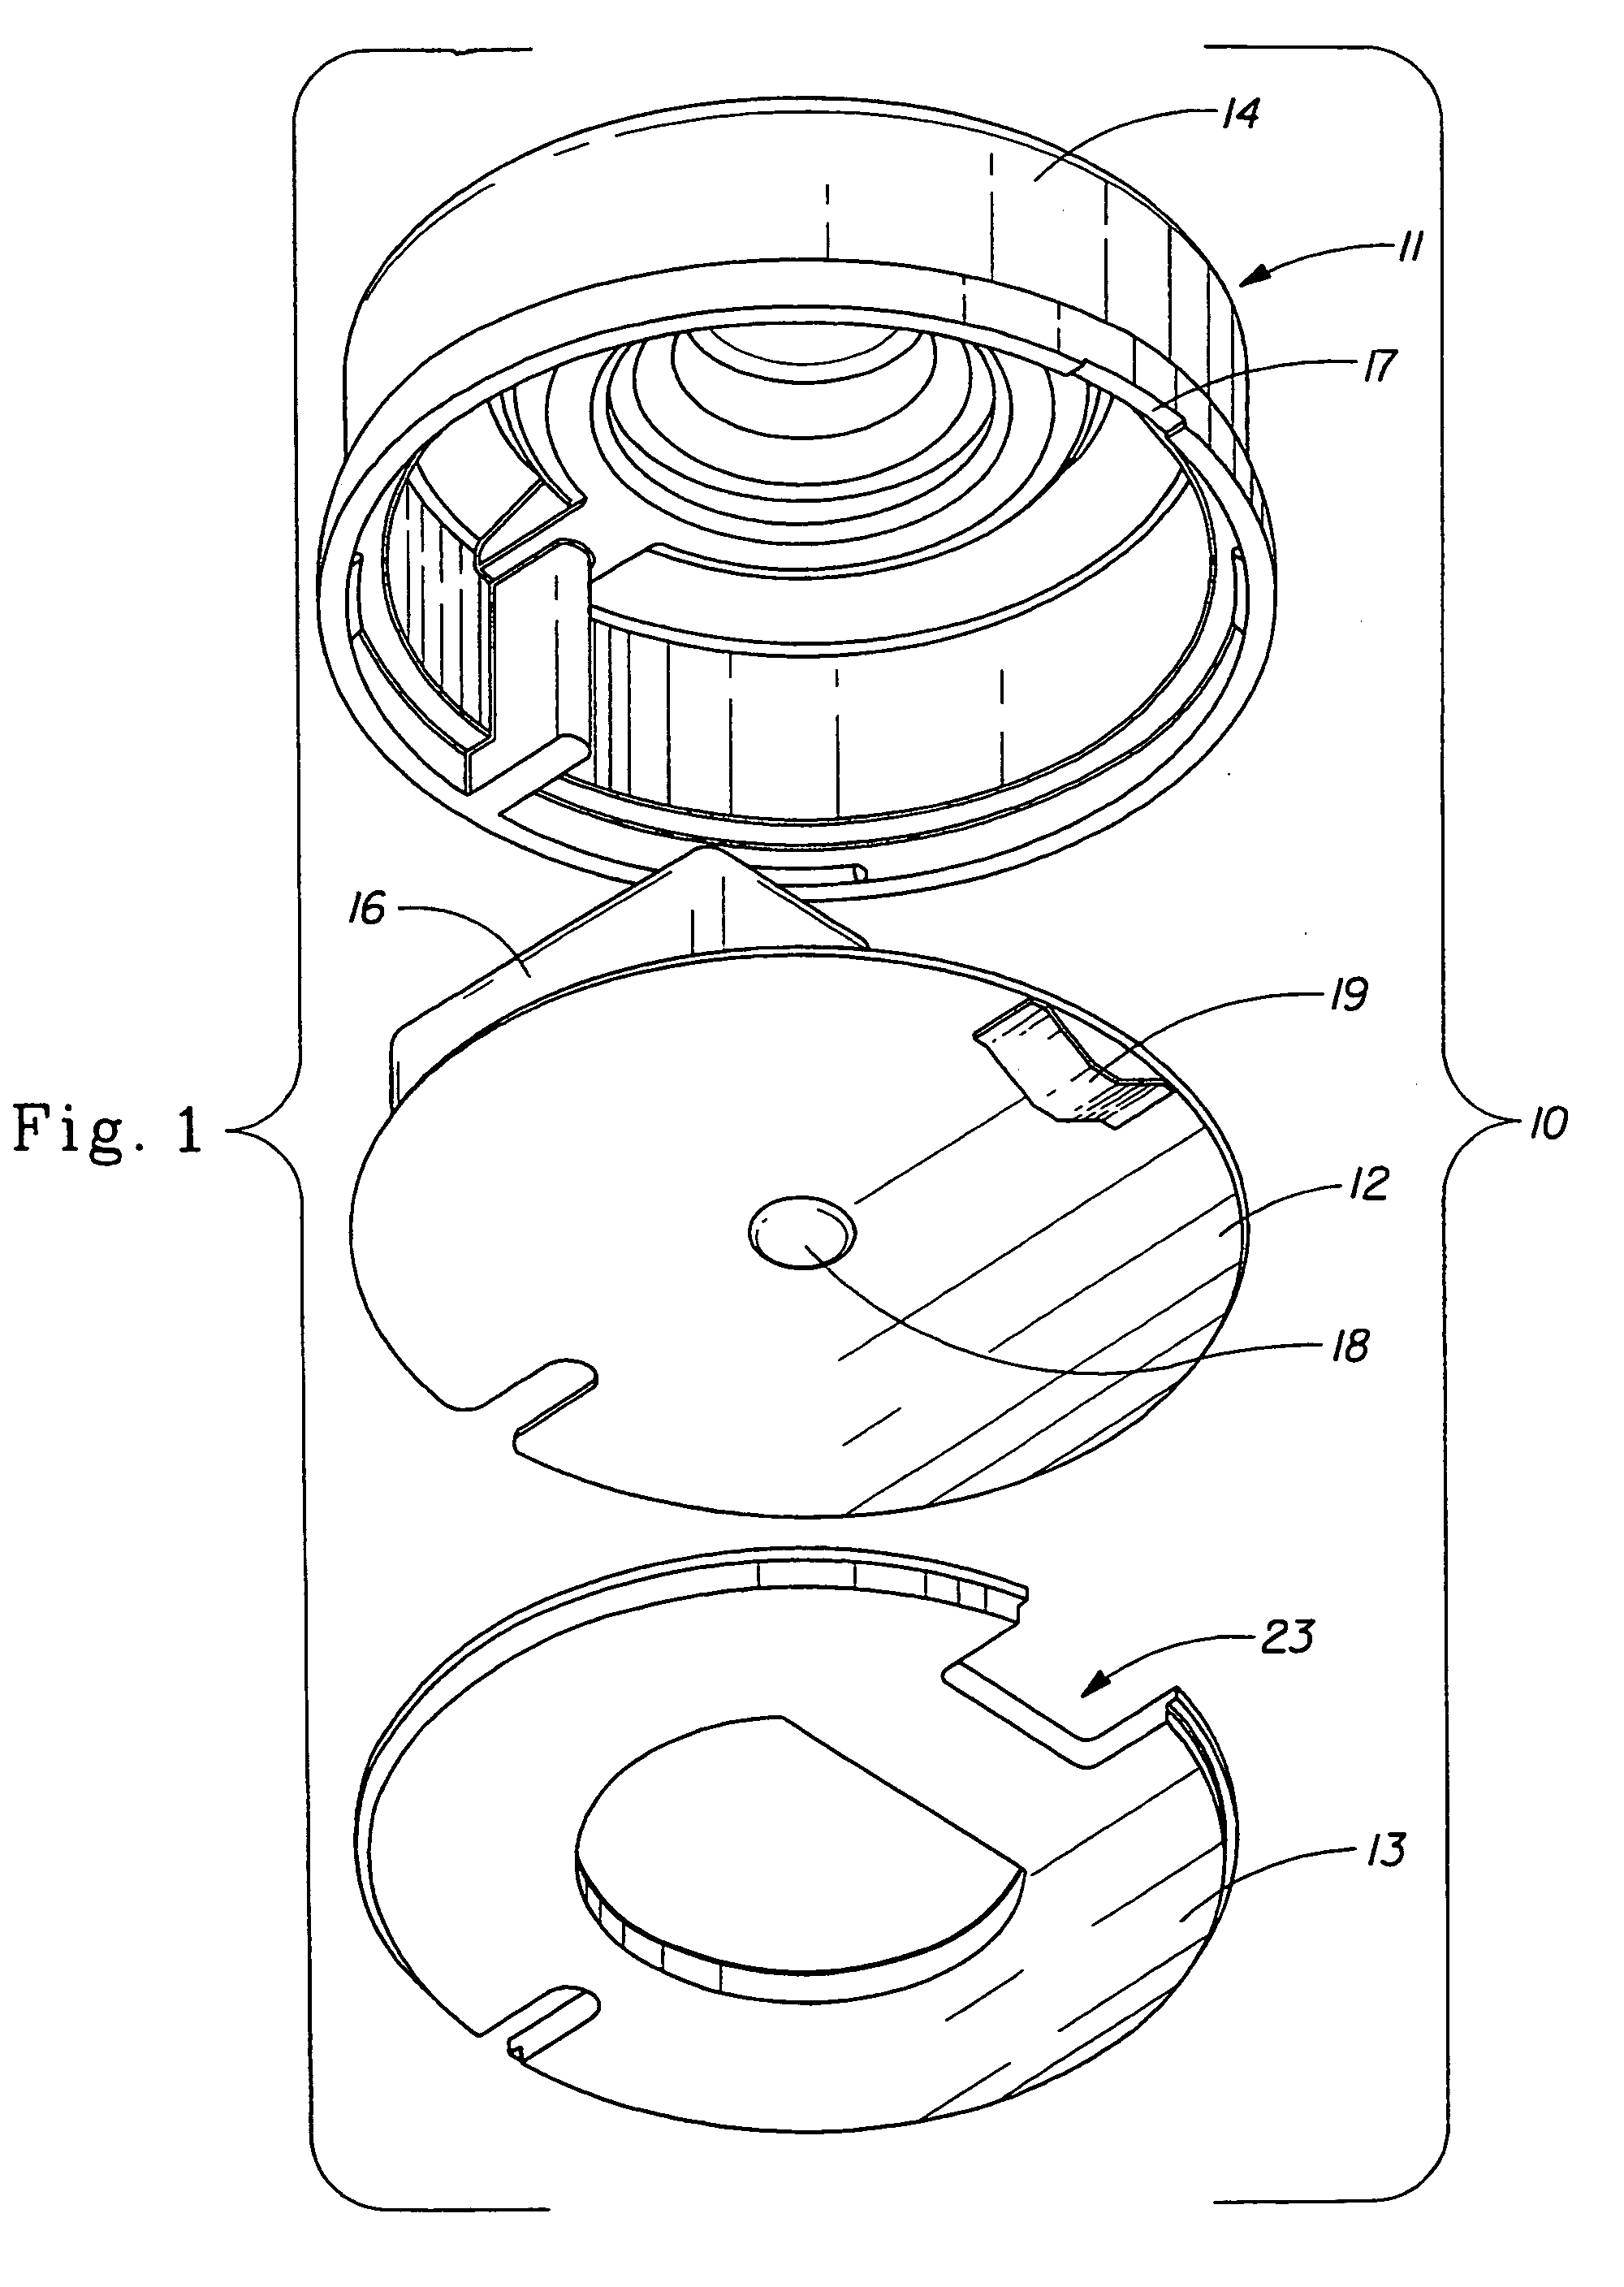 Battery having a housing for electronic circuitry